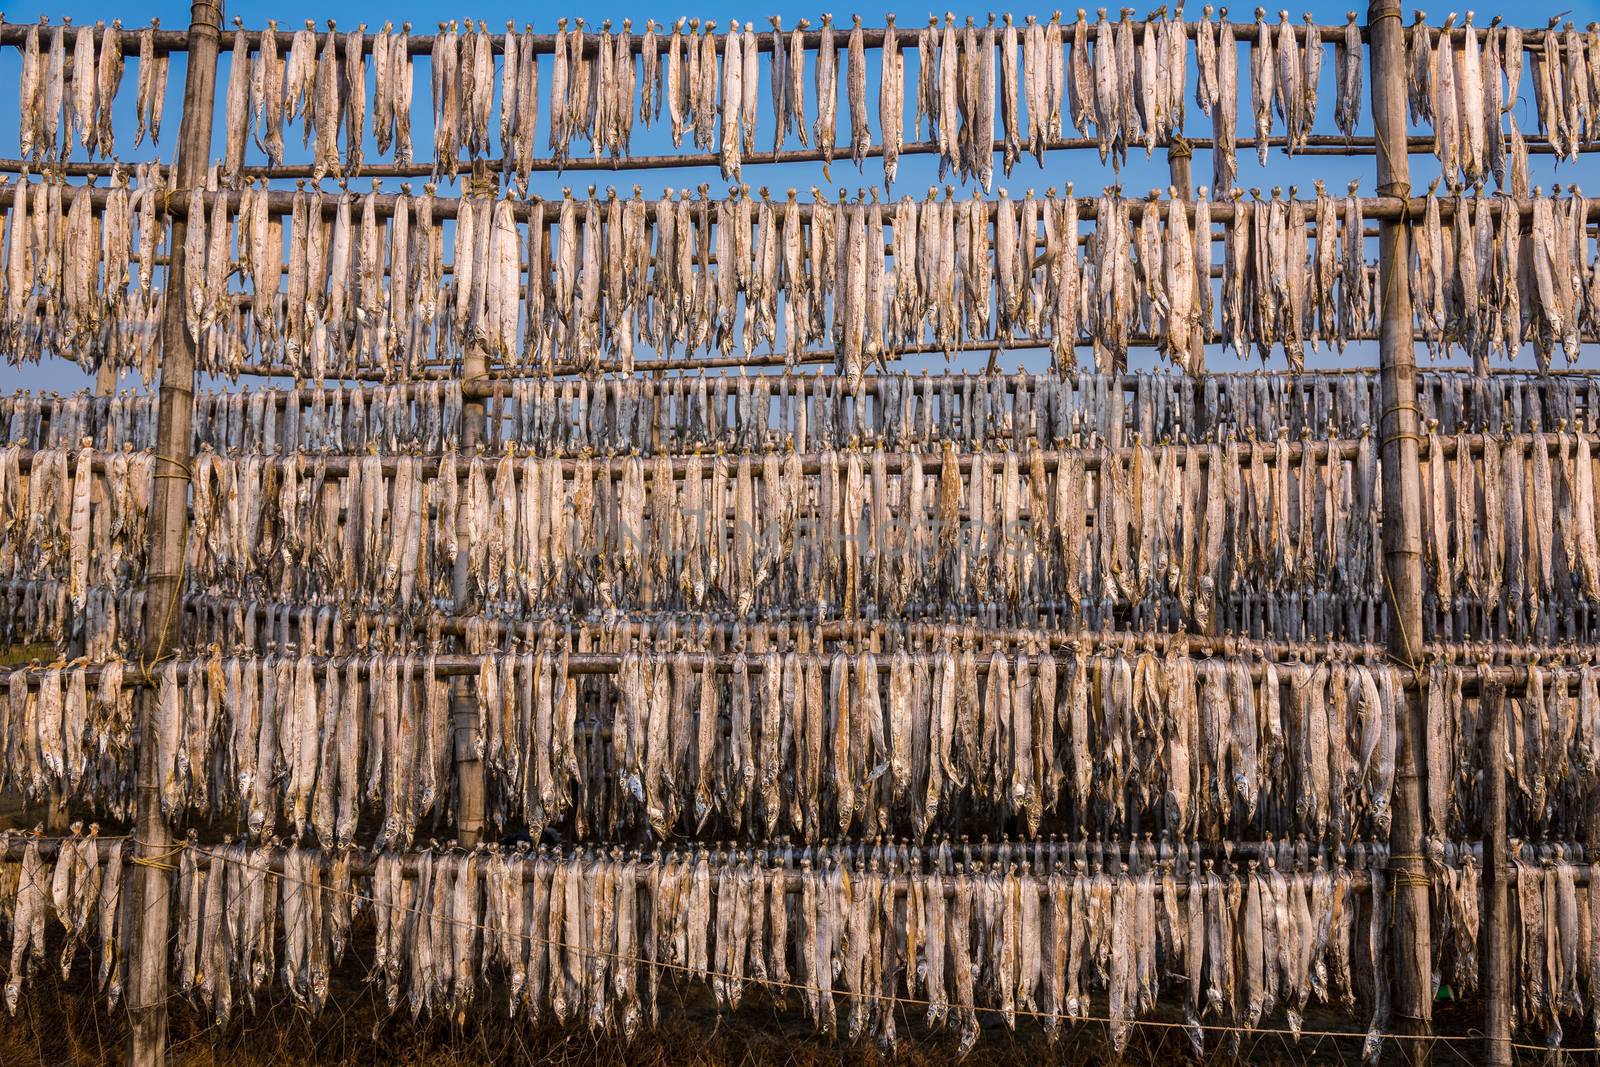 Hundreds of fish suspended from bamboo poles being dried at a fishing industry in Digha, West Bengal, India